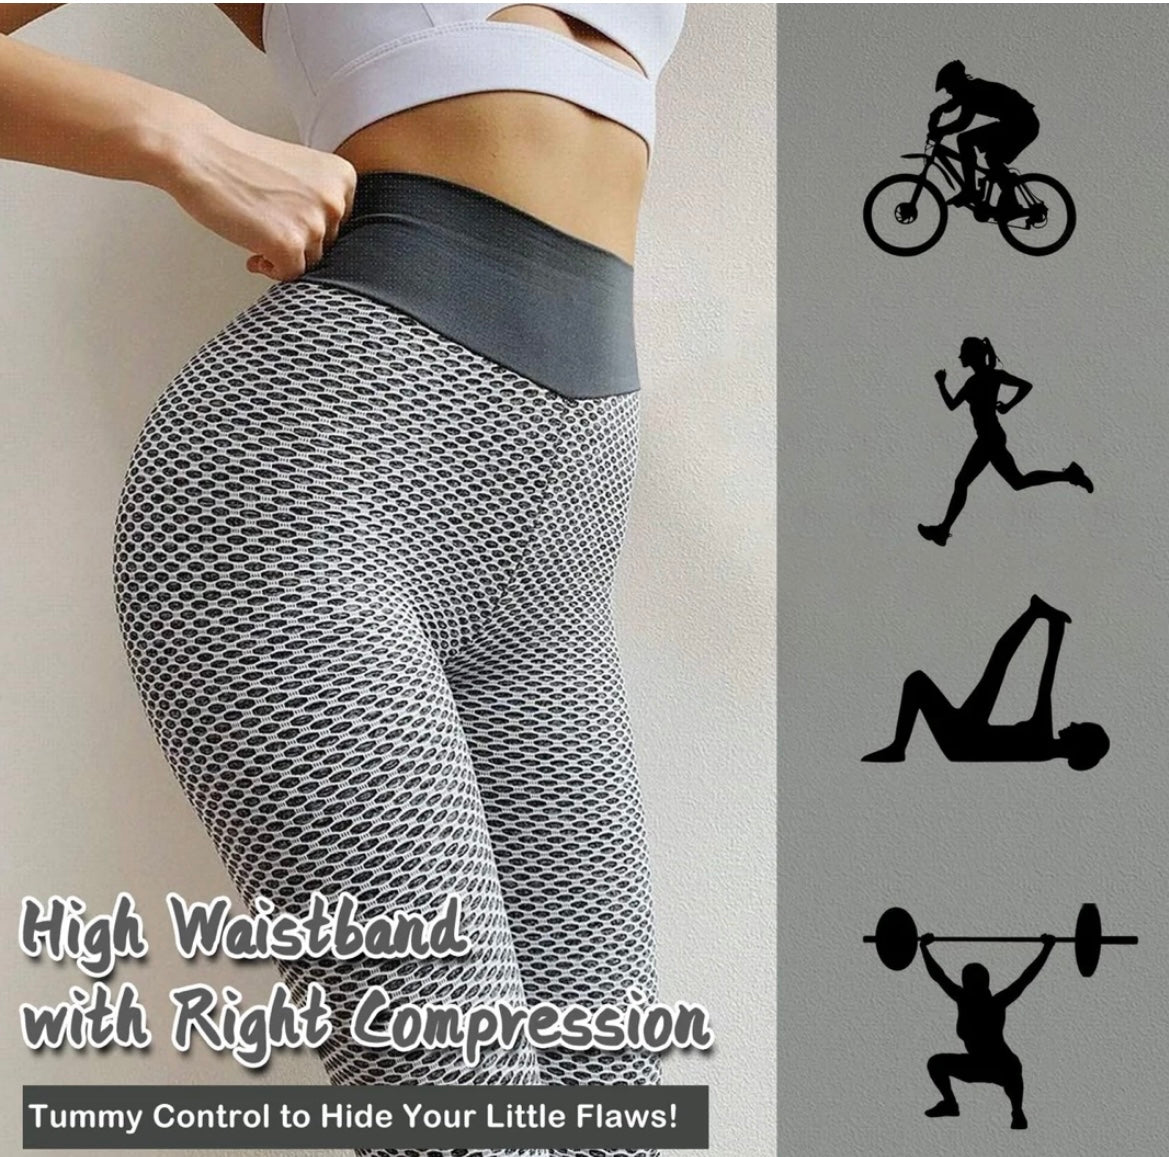 Anti Cellulite Compression Women High-waisted Shaping Leggings Slimmer  Shapewear | eBay